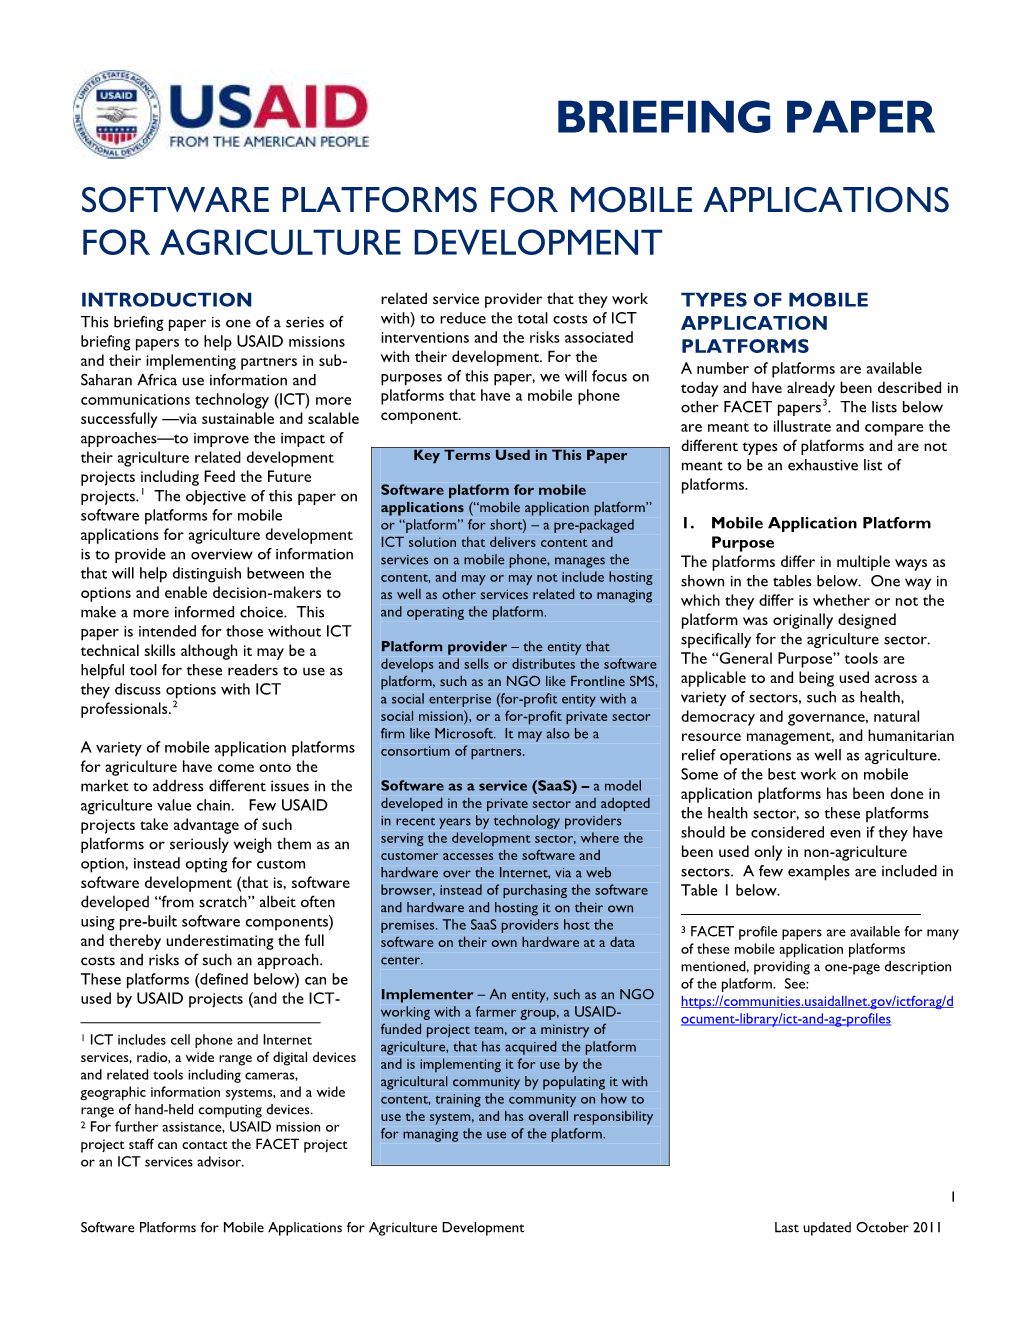 Software Platforms for Mobile Applications for Agriculture Development